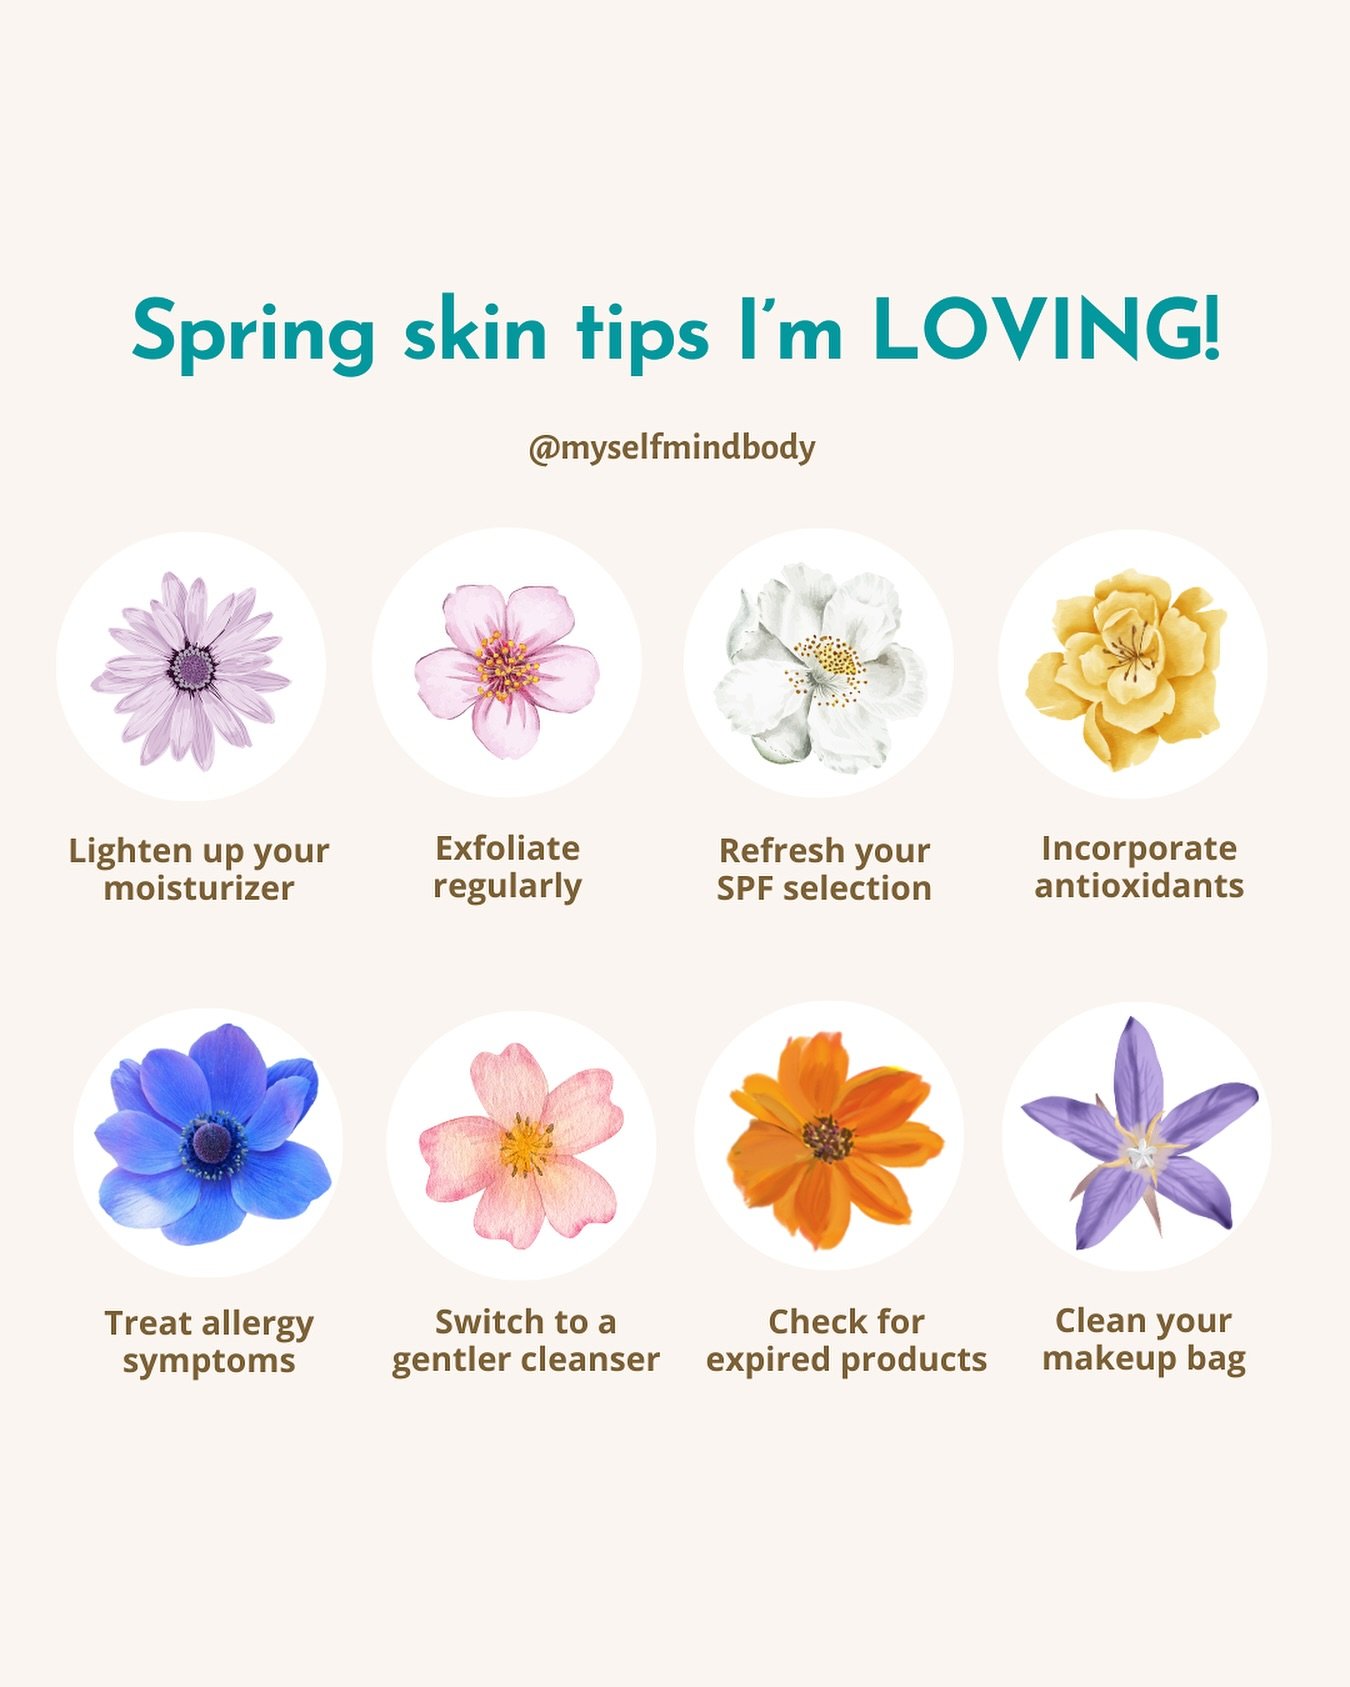 Spring into beautiful skin with these fresh tips! 🌸 

As the seasons change, consider switching to a gentler cleanser to keep your skin soft and supple. 

Don&rsquo;t forget to exfoliate regularly for that flawless finish. 🌿

Is your skin ready for